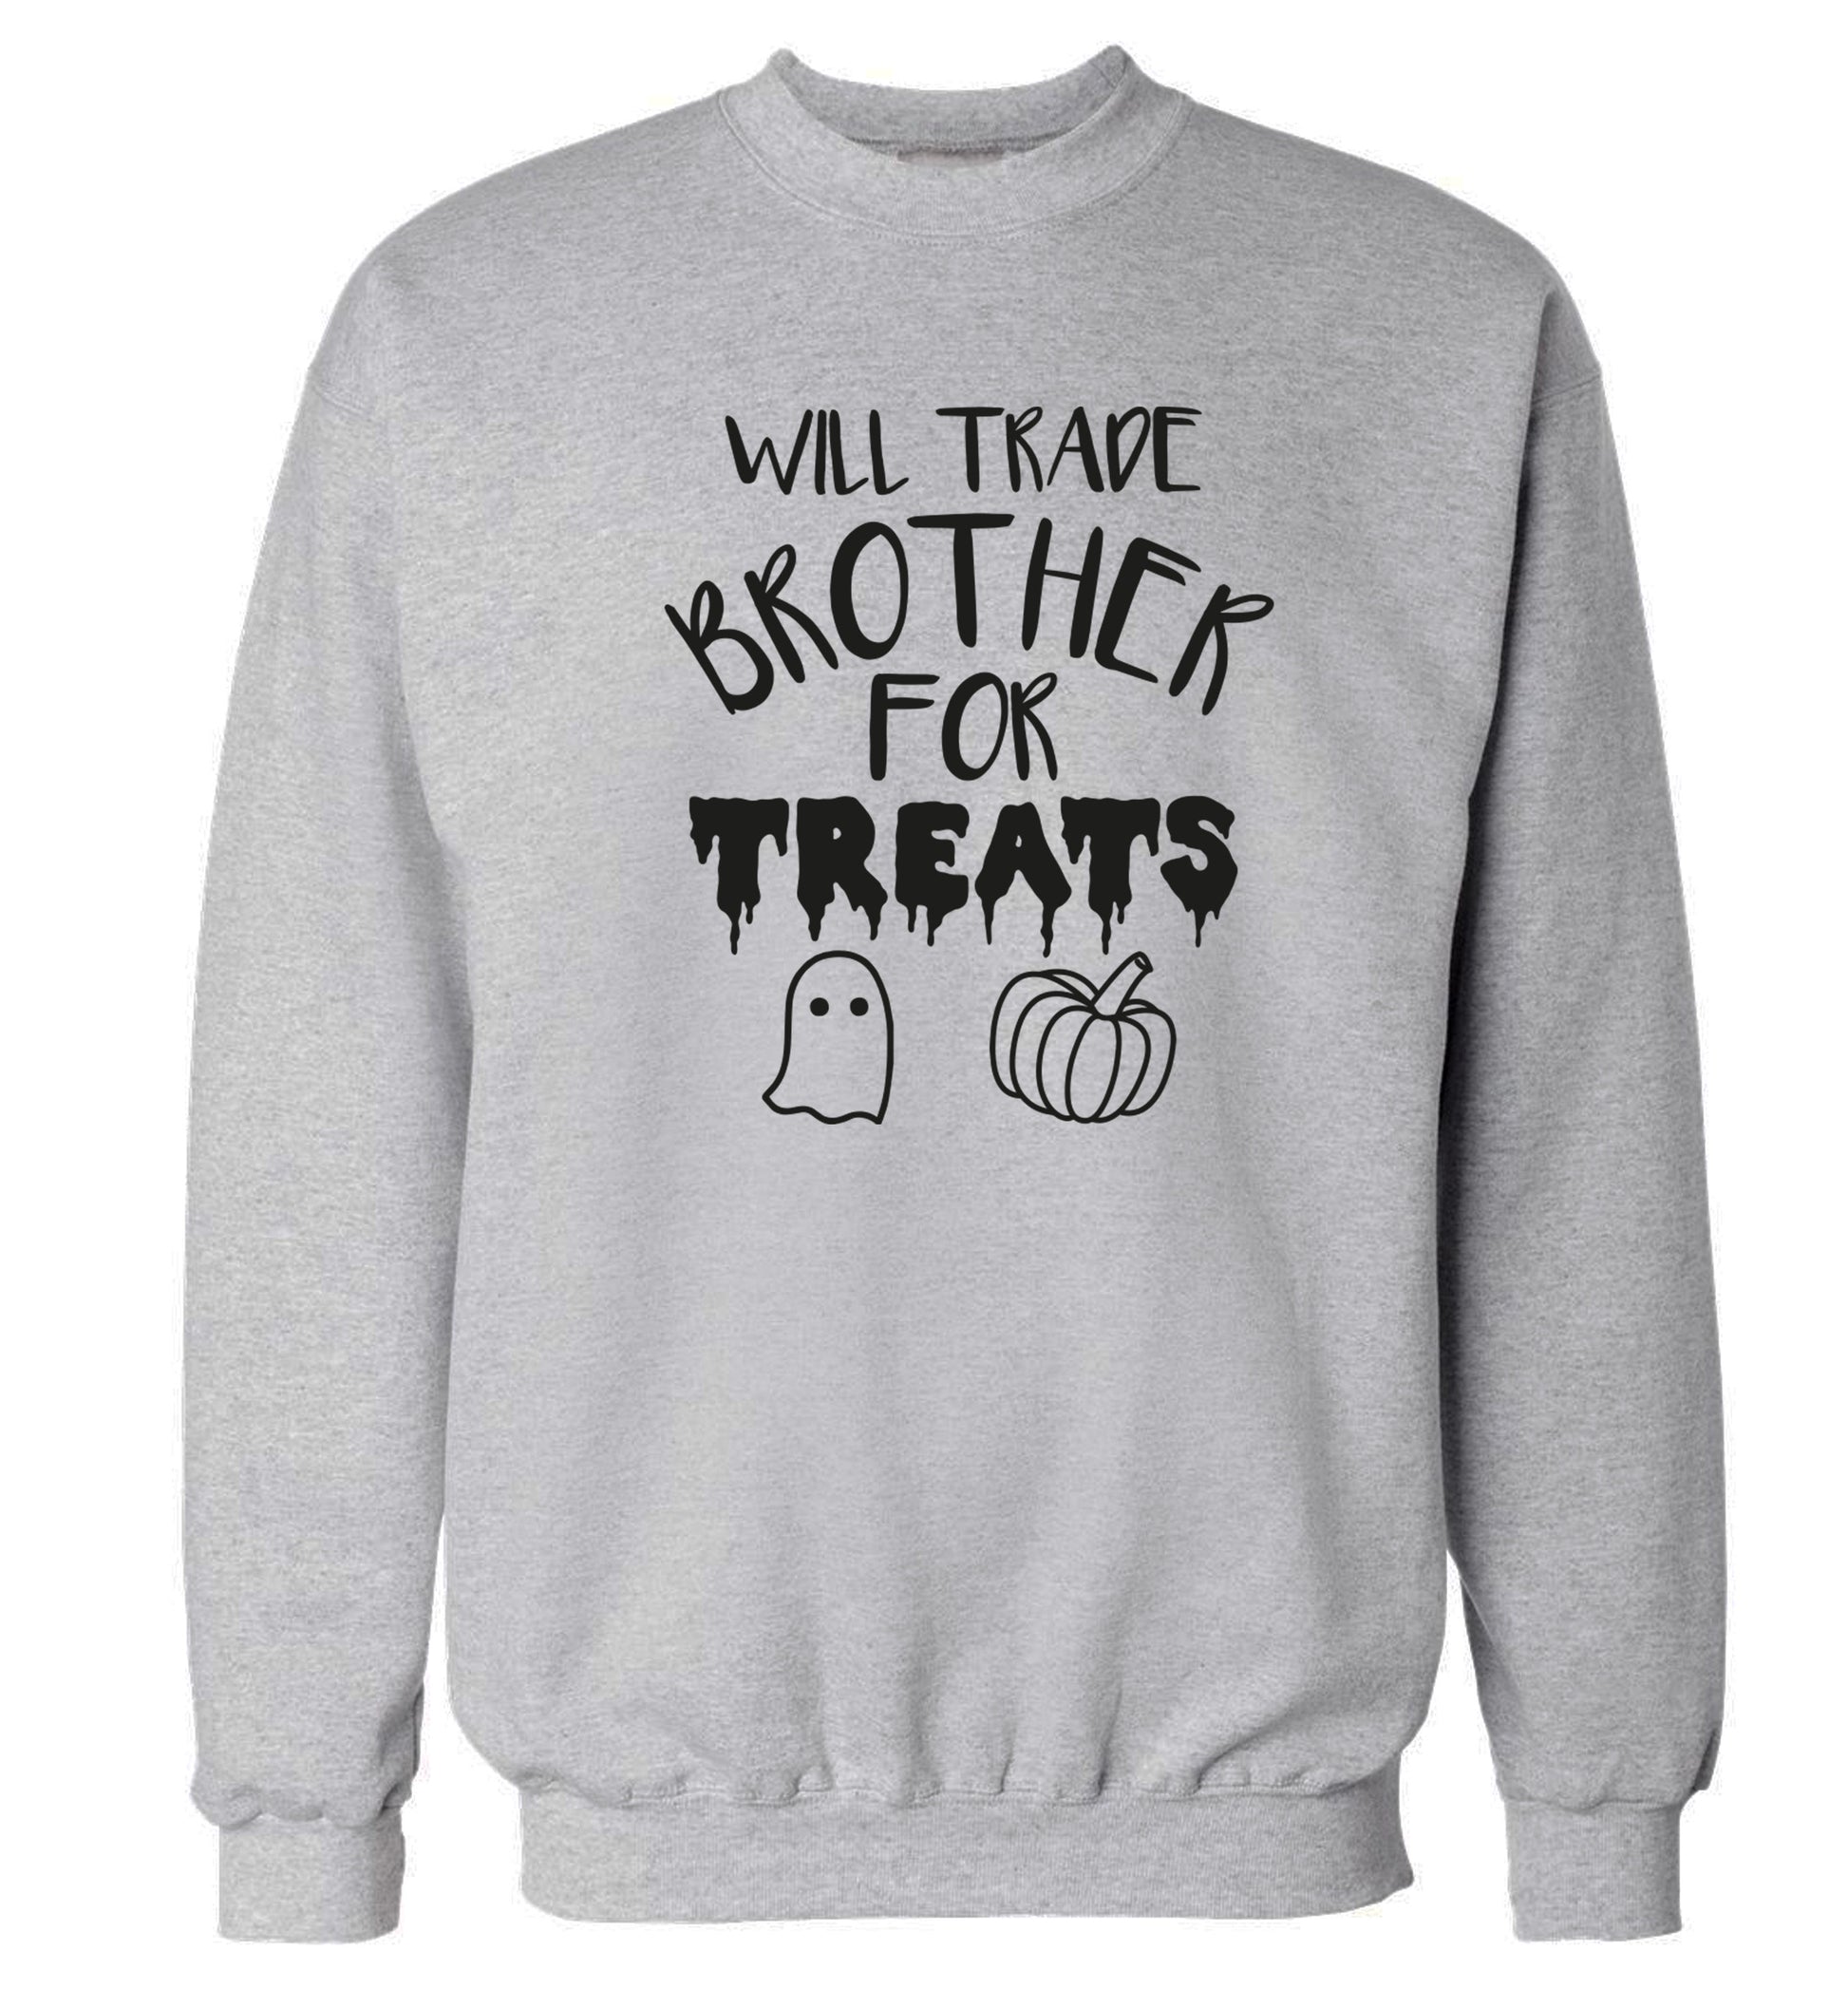 Will trade brother for treats Adult's unisex grey Sweater 2XL